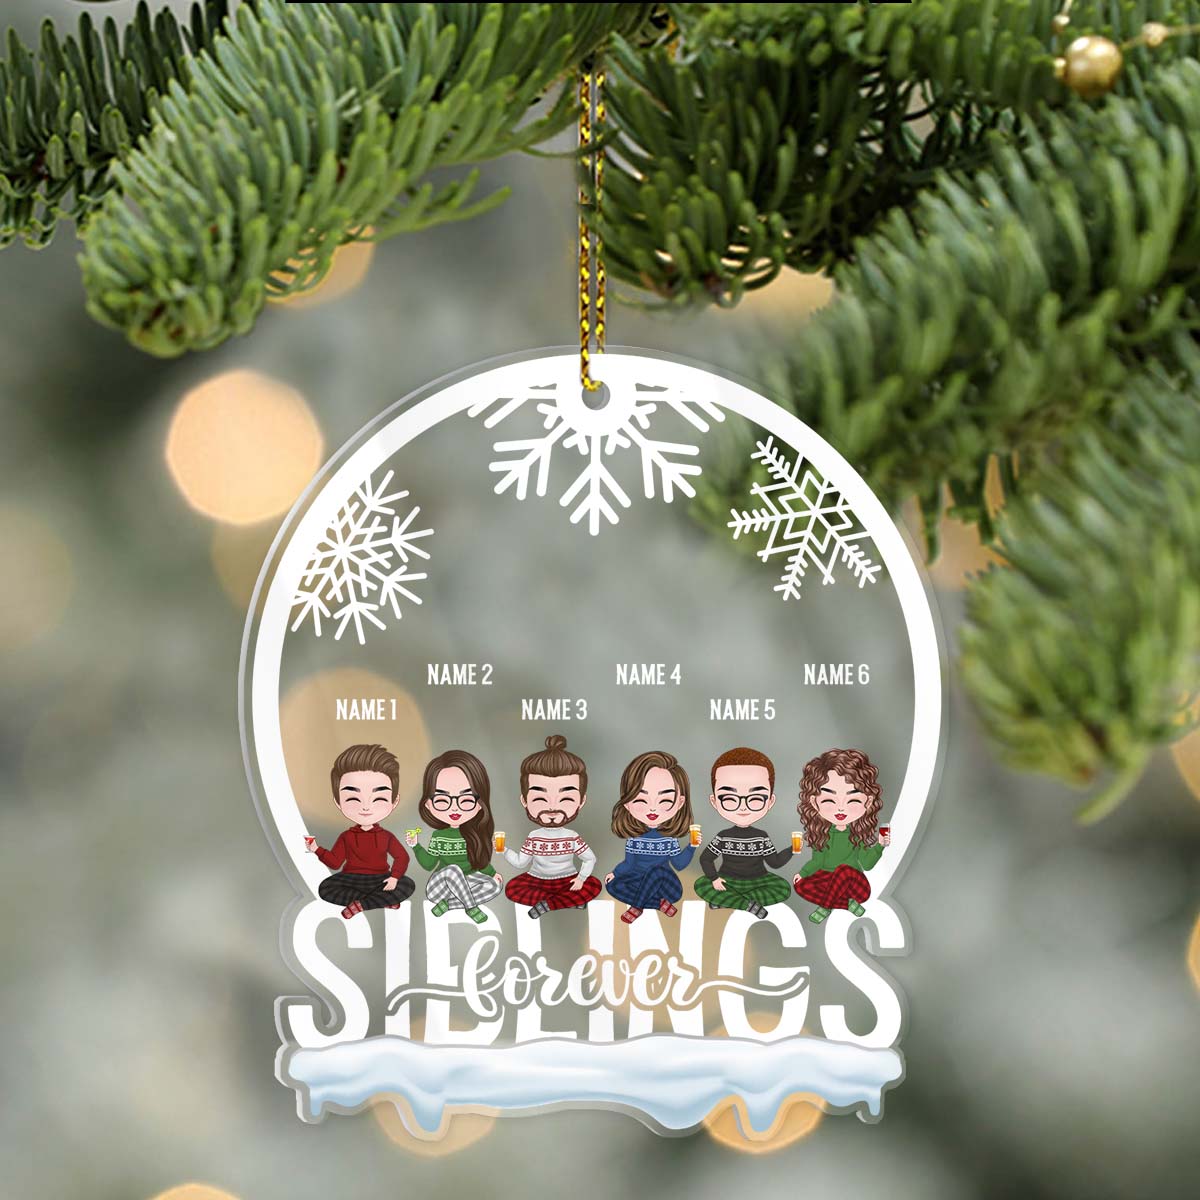 Siblings Forever Personalized Custom Name Shaped Transparent Ornaments - Christmas Gift For Family, Dad, Mom, Sisters, Brothers